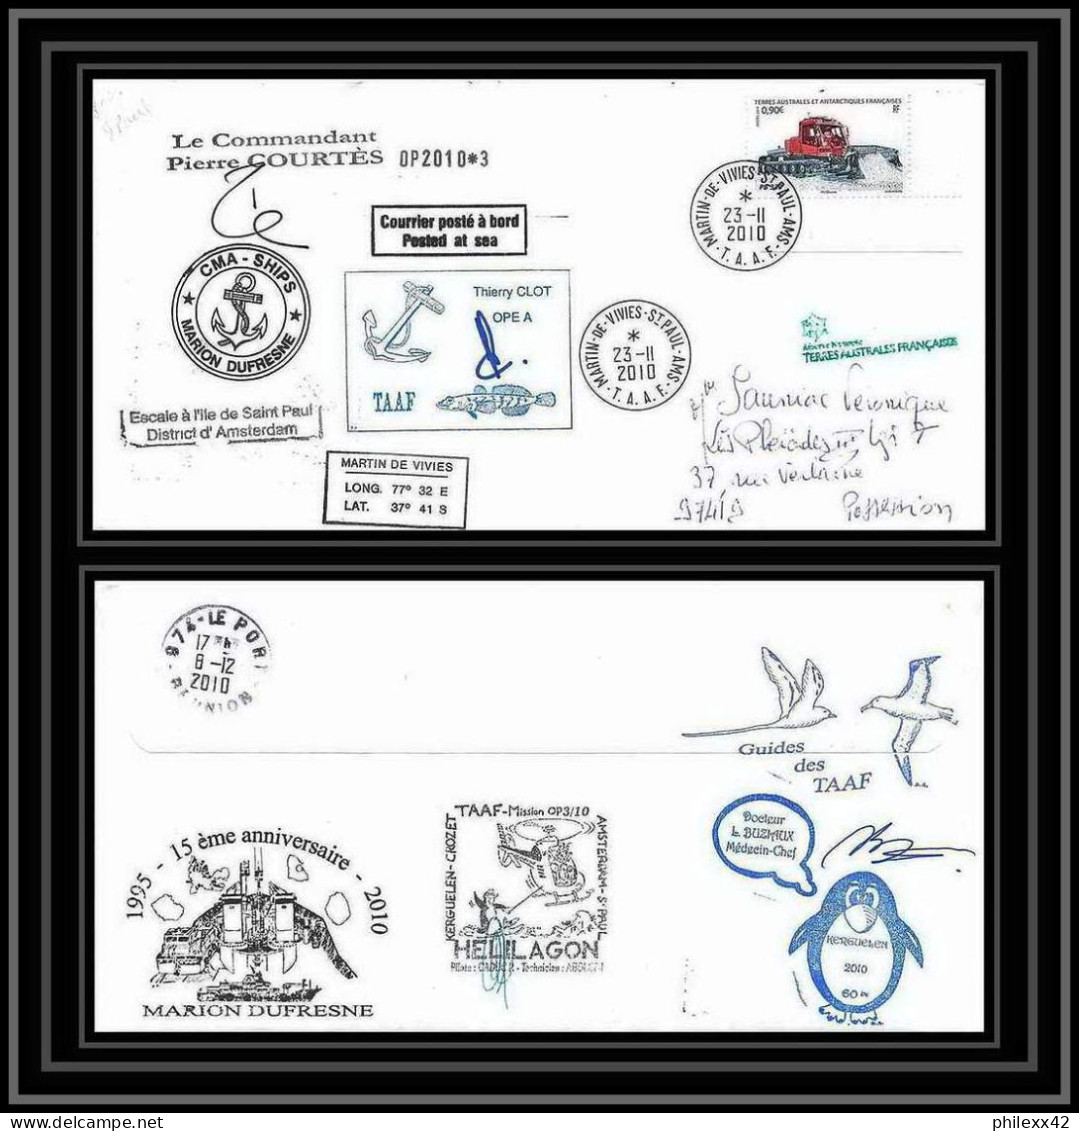 3046 Helilagon Dufresne Signé Signed Op 23/11/2010/3 St Paul N°565 Coin De Feuille Terres Australes (taaf) Lettre Cover - Hubschrauber